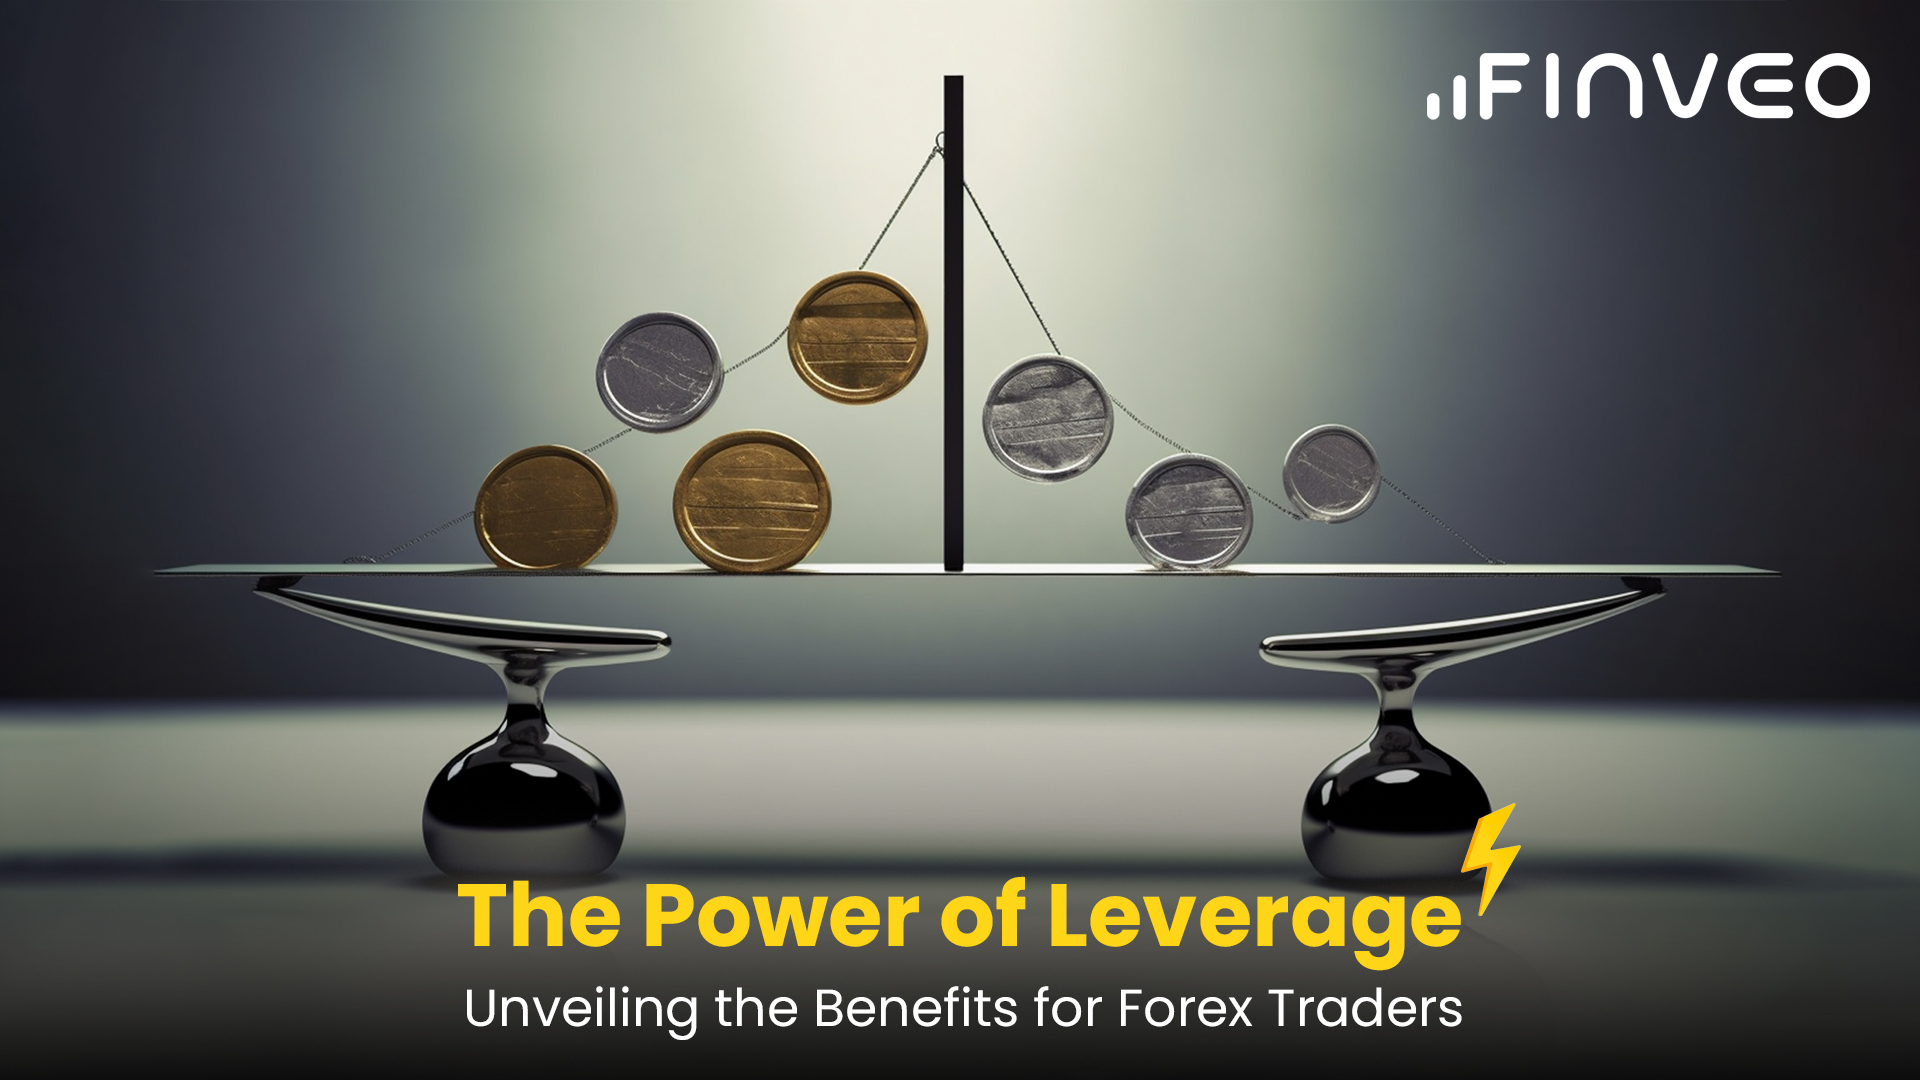 The Power of Leverage: Unveiling the Benefits for Forex Traders